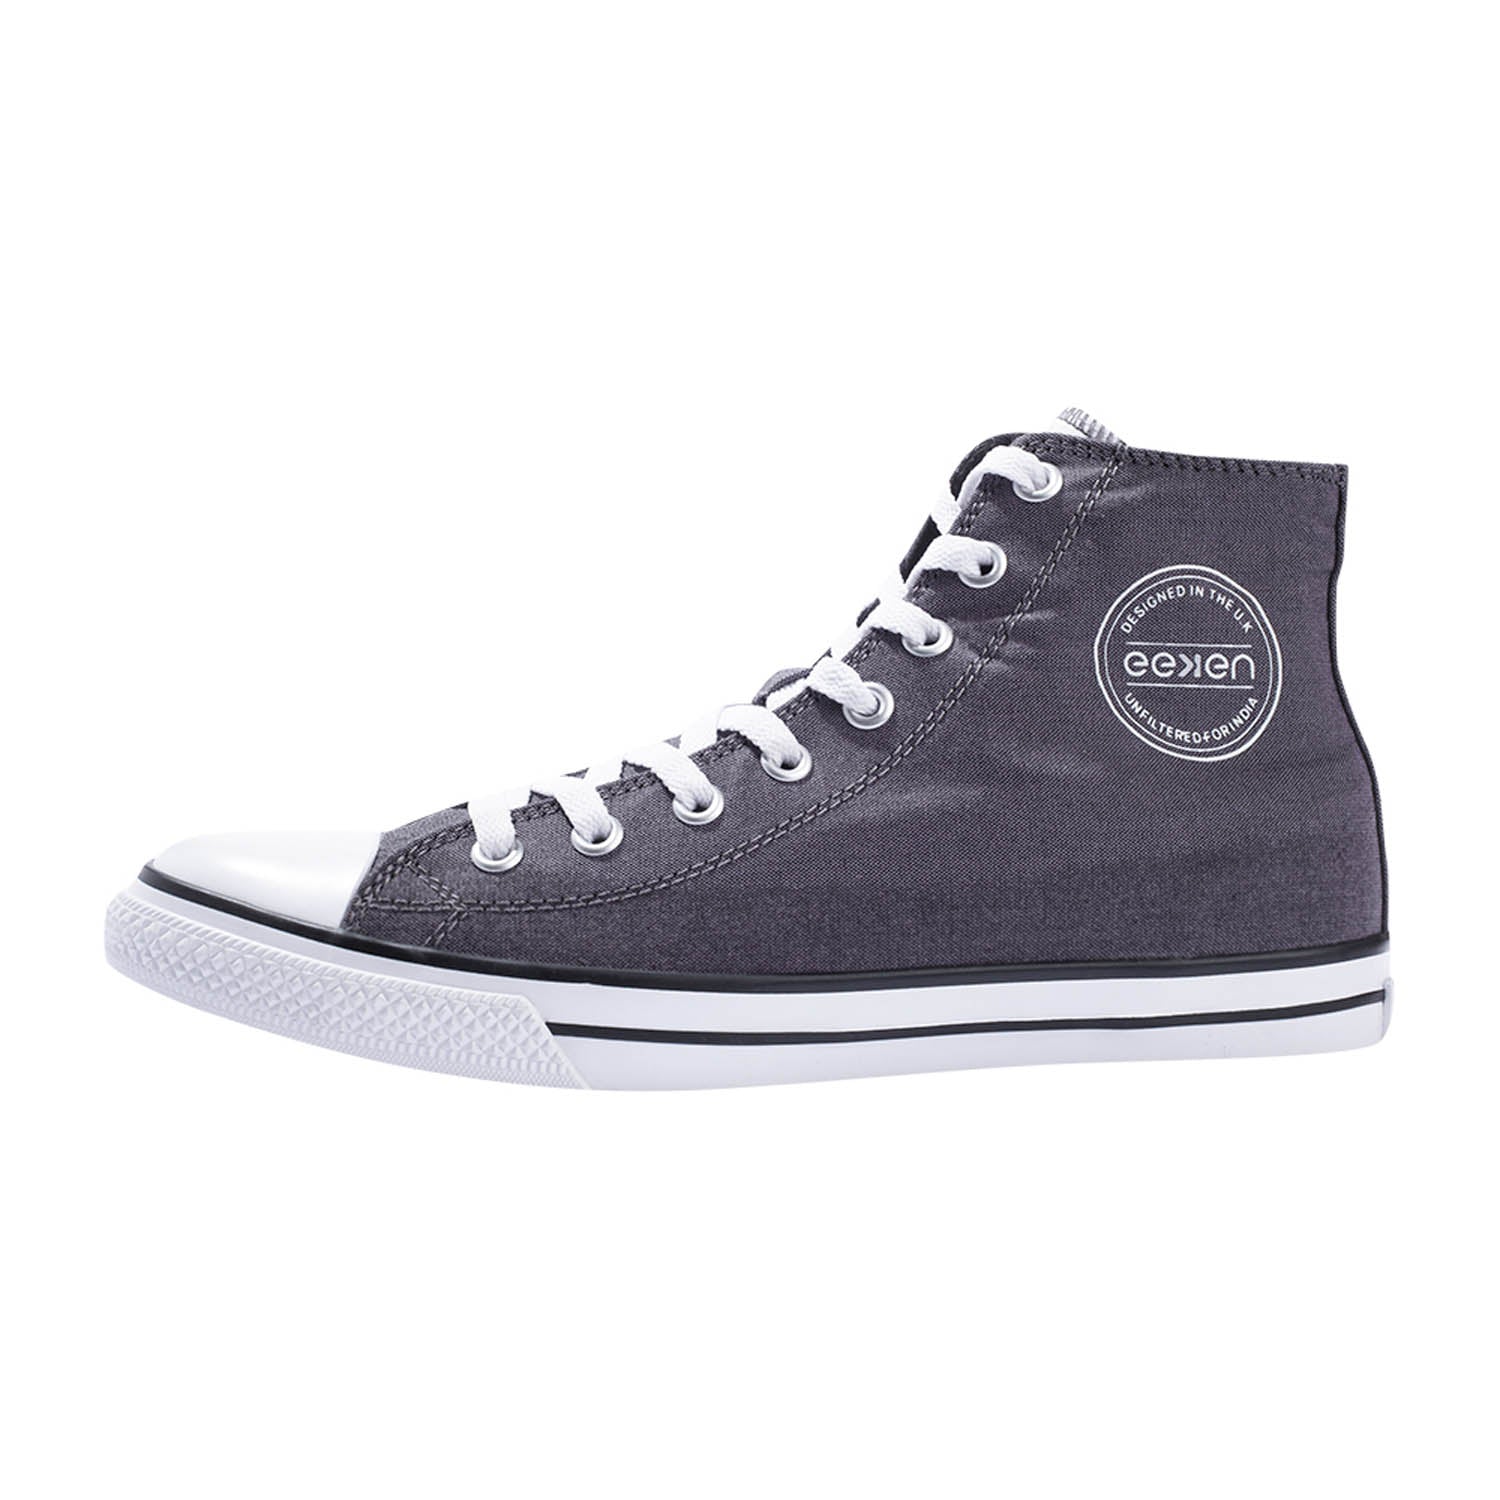 Eeken Freestyl Pro From The House Of Paragon High Tops For Men